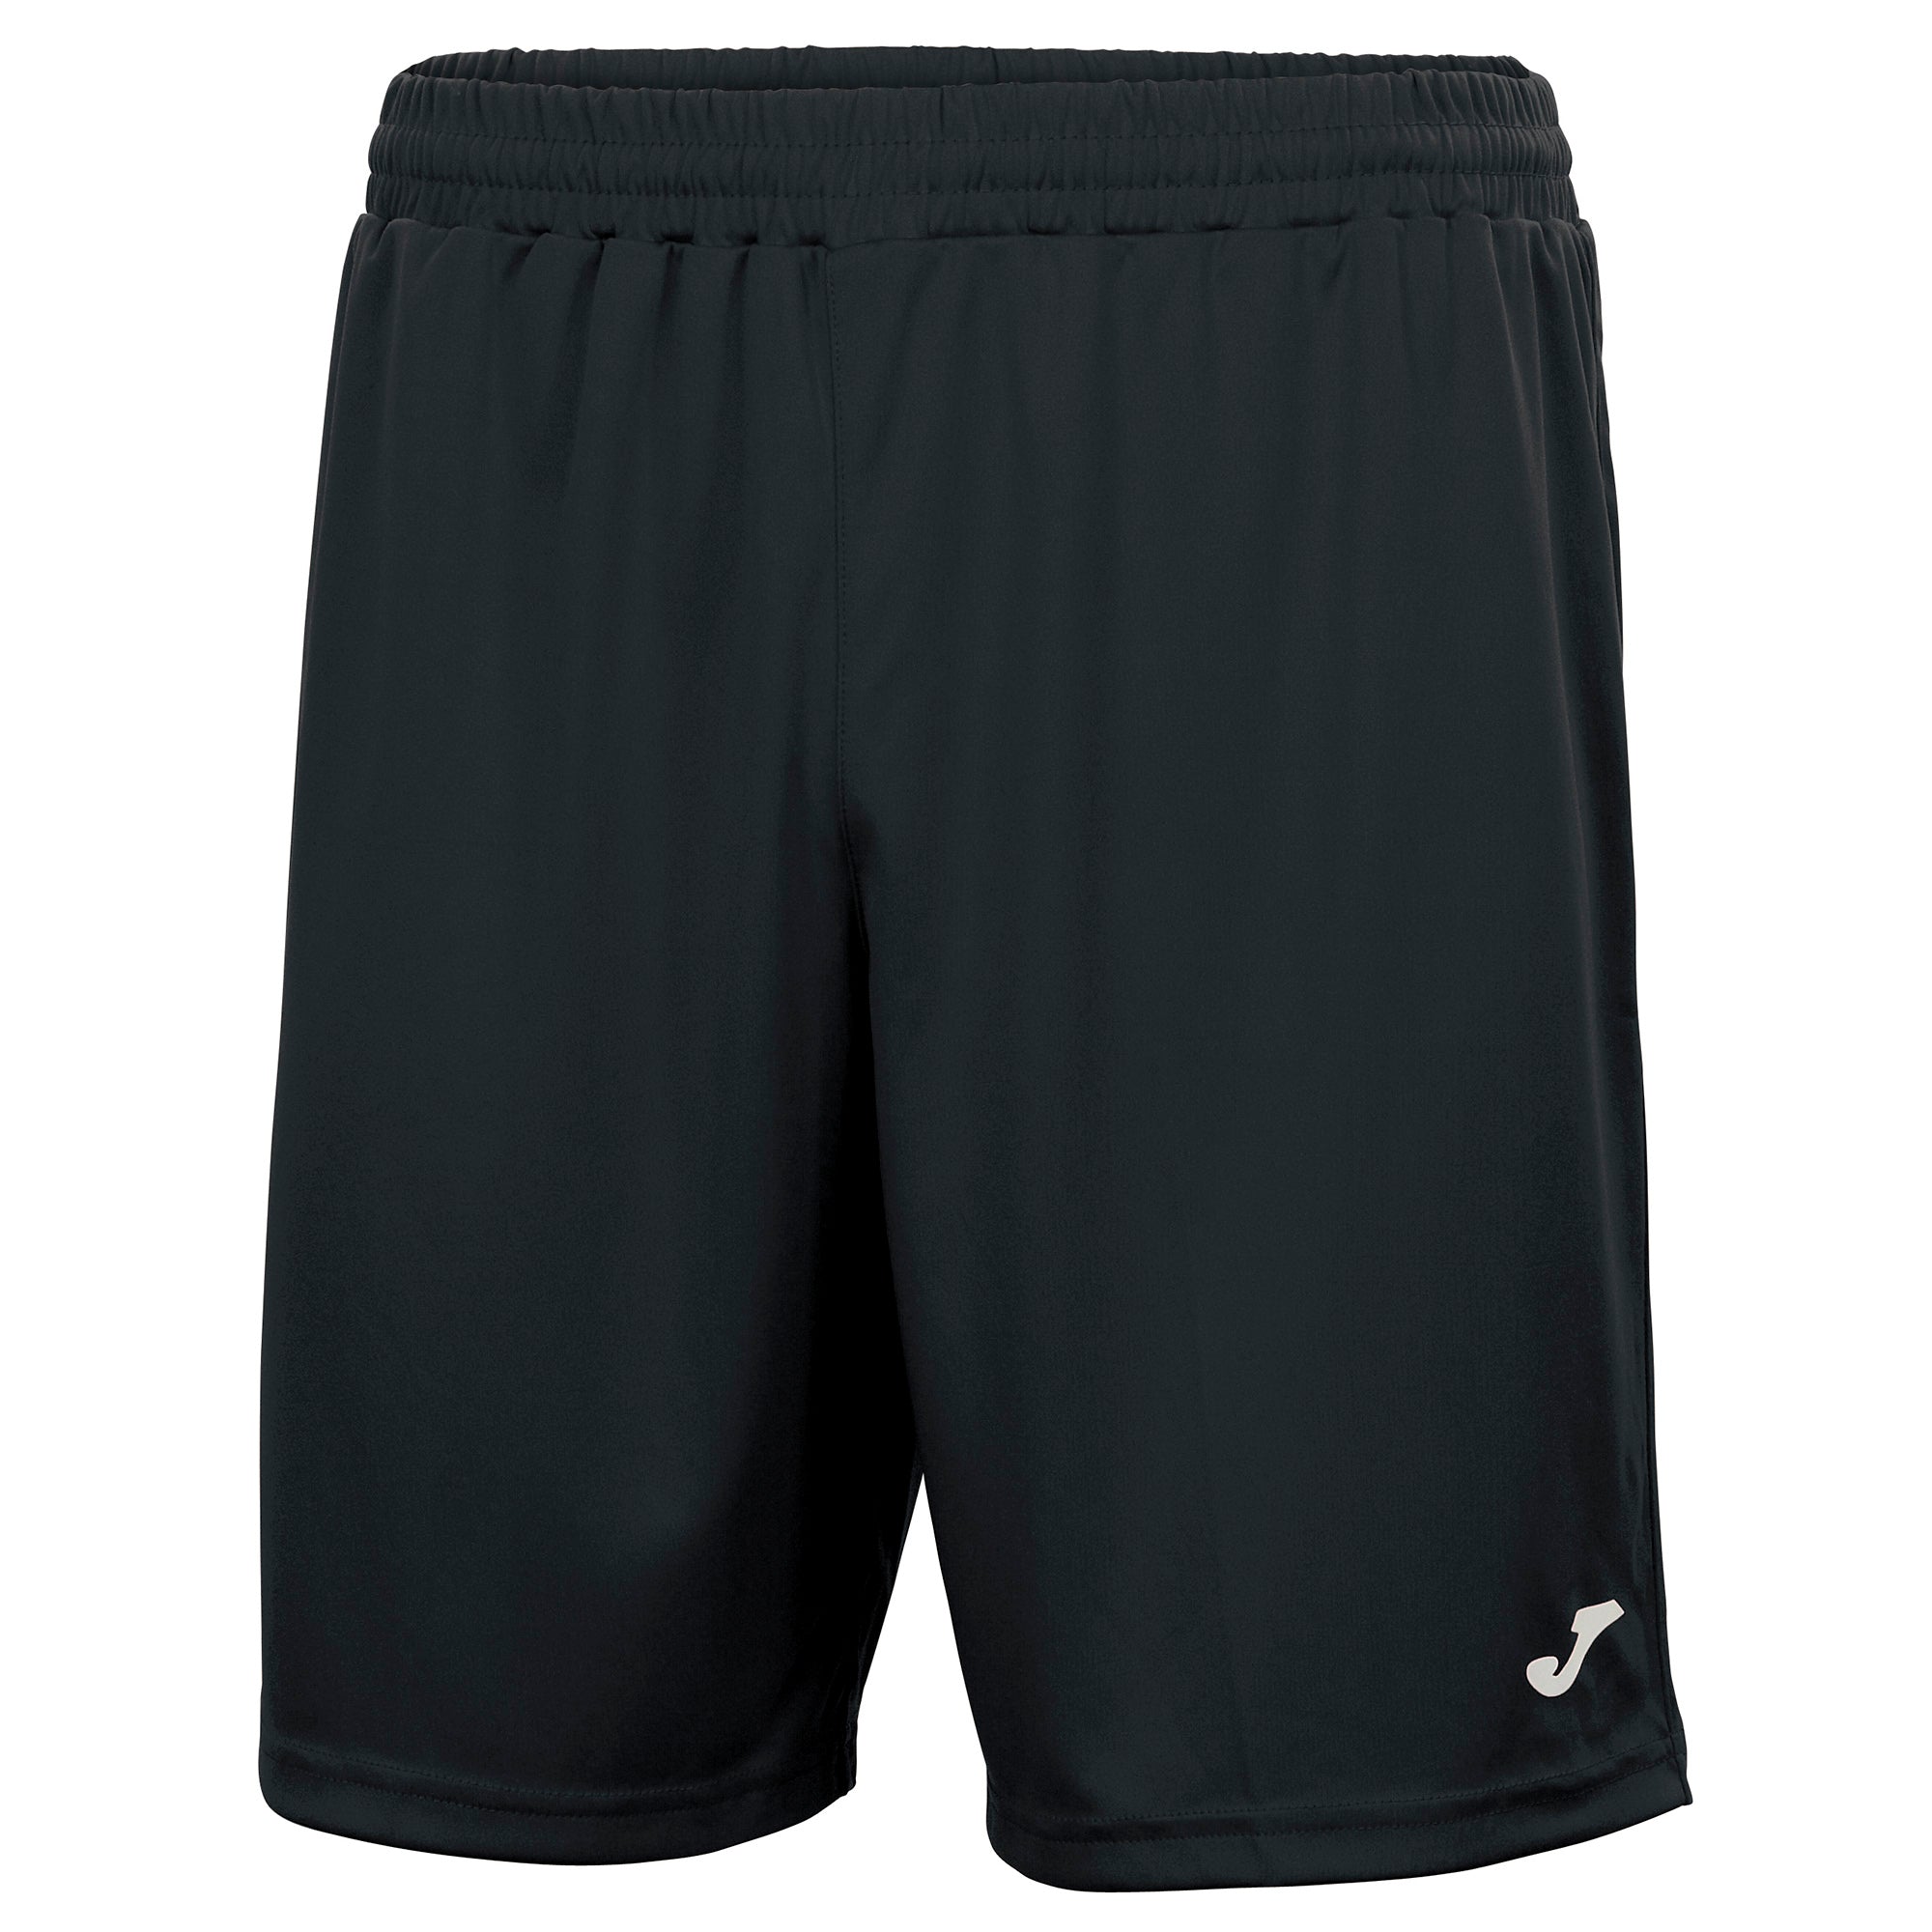 Replacement Game Shorts - ITA Sports Shop